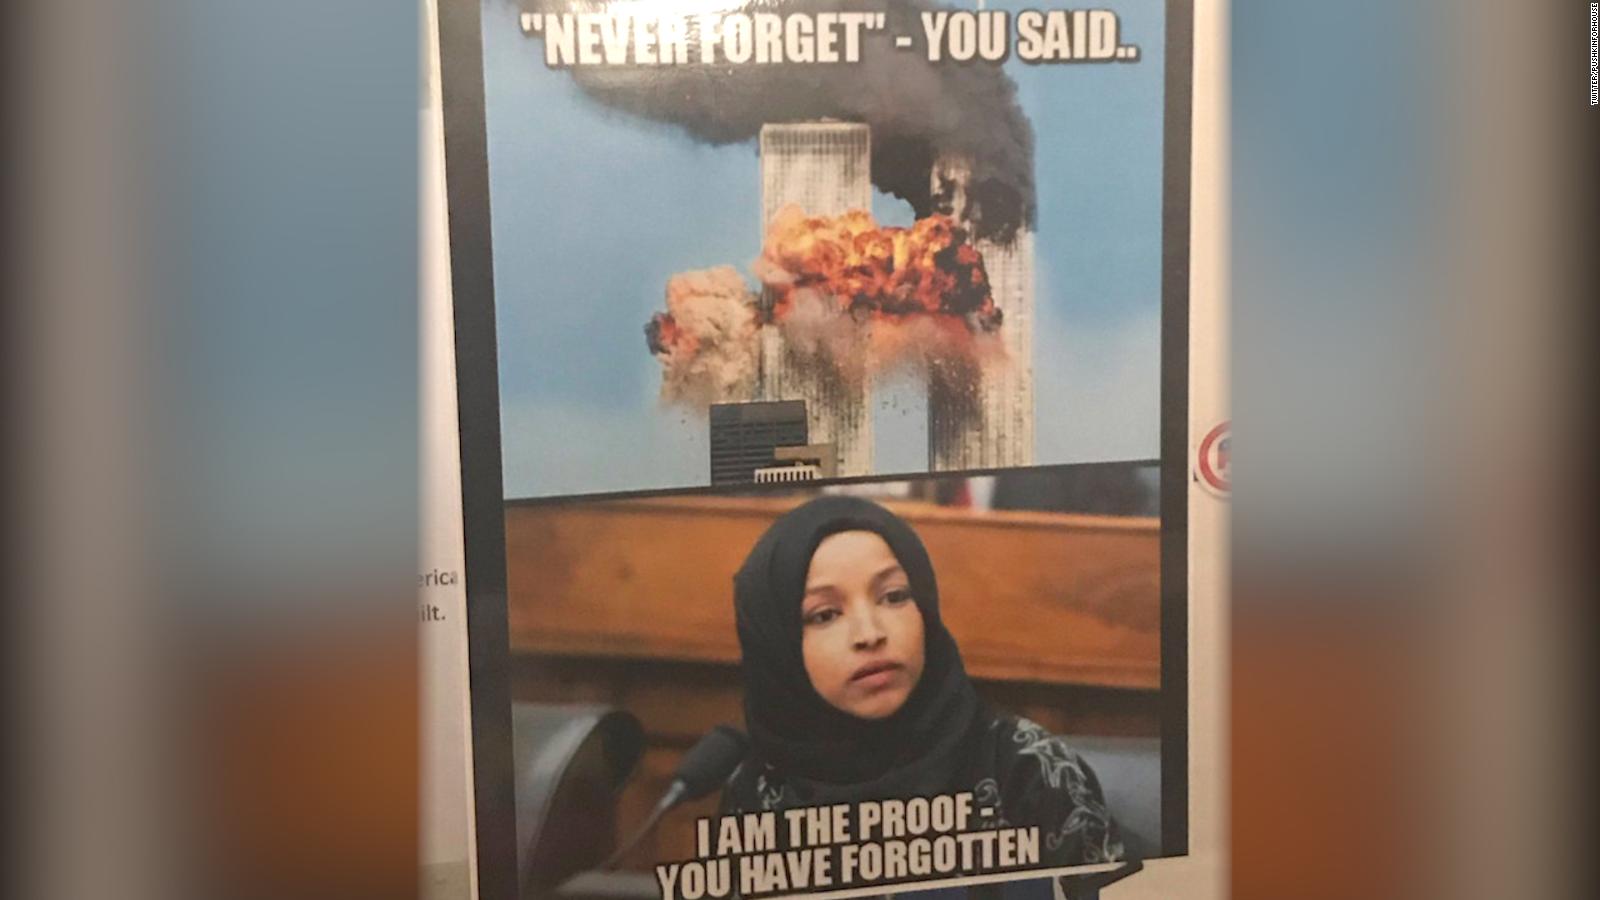 Ilhan Omar Blasts Gop Over Poster Linking Her With The 911 Attacks Cnnpolitics